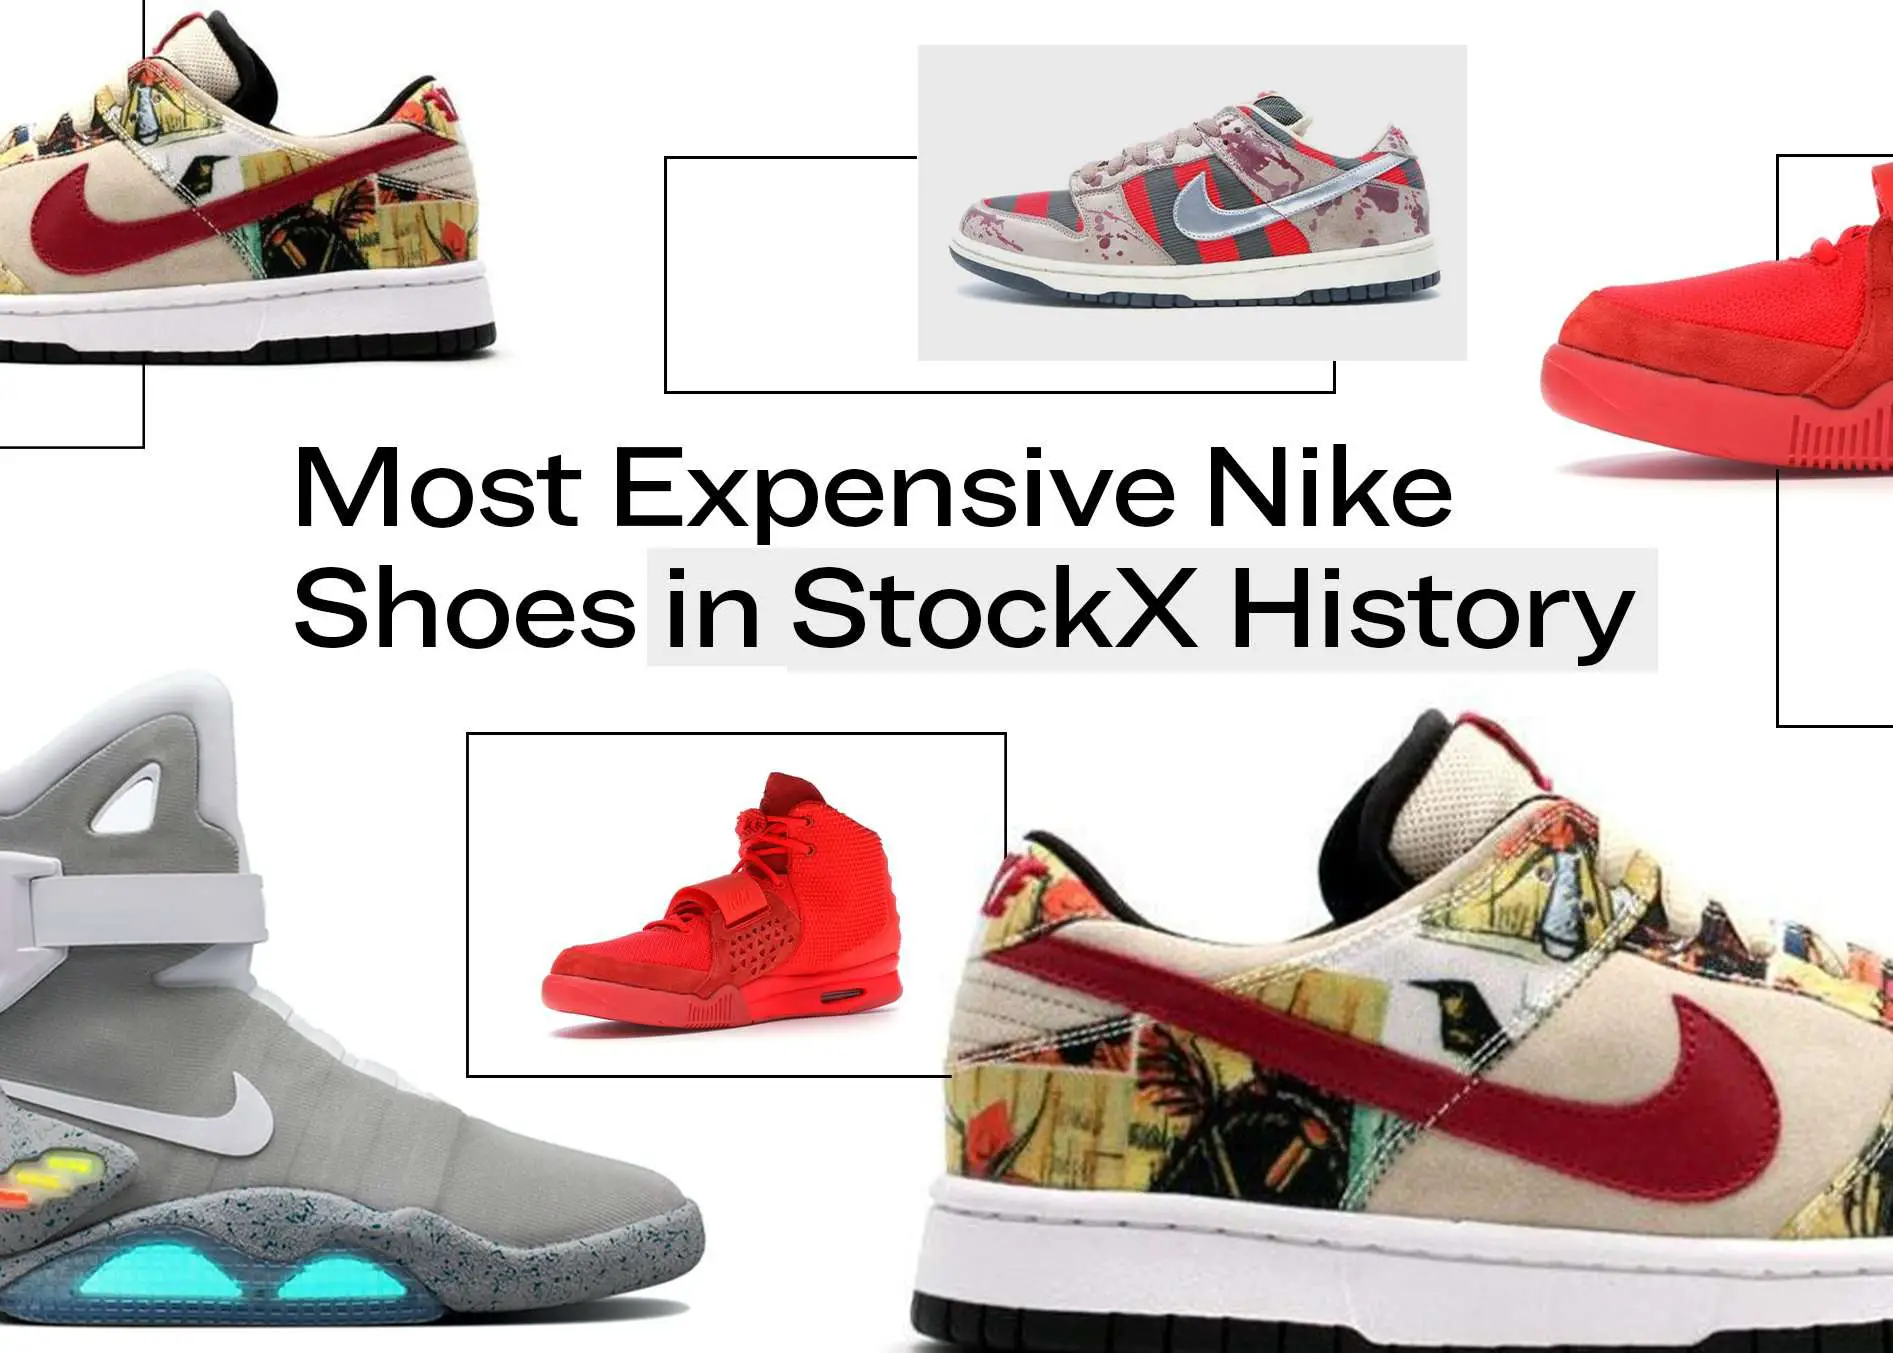 Most Expensive Nike Shoes in StockX History